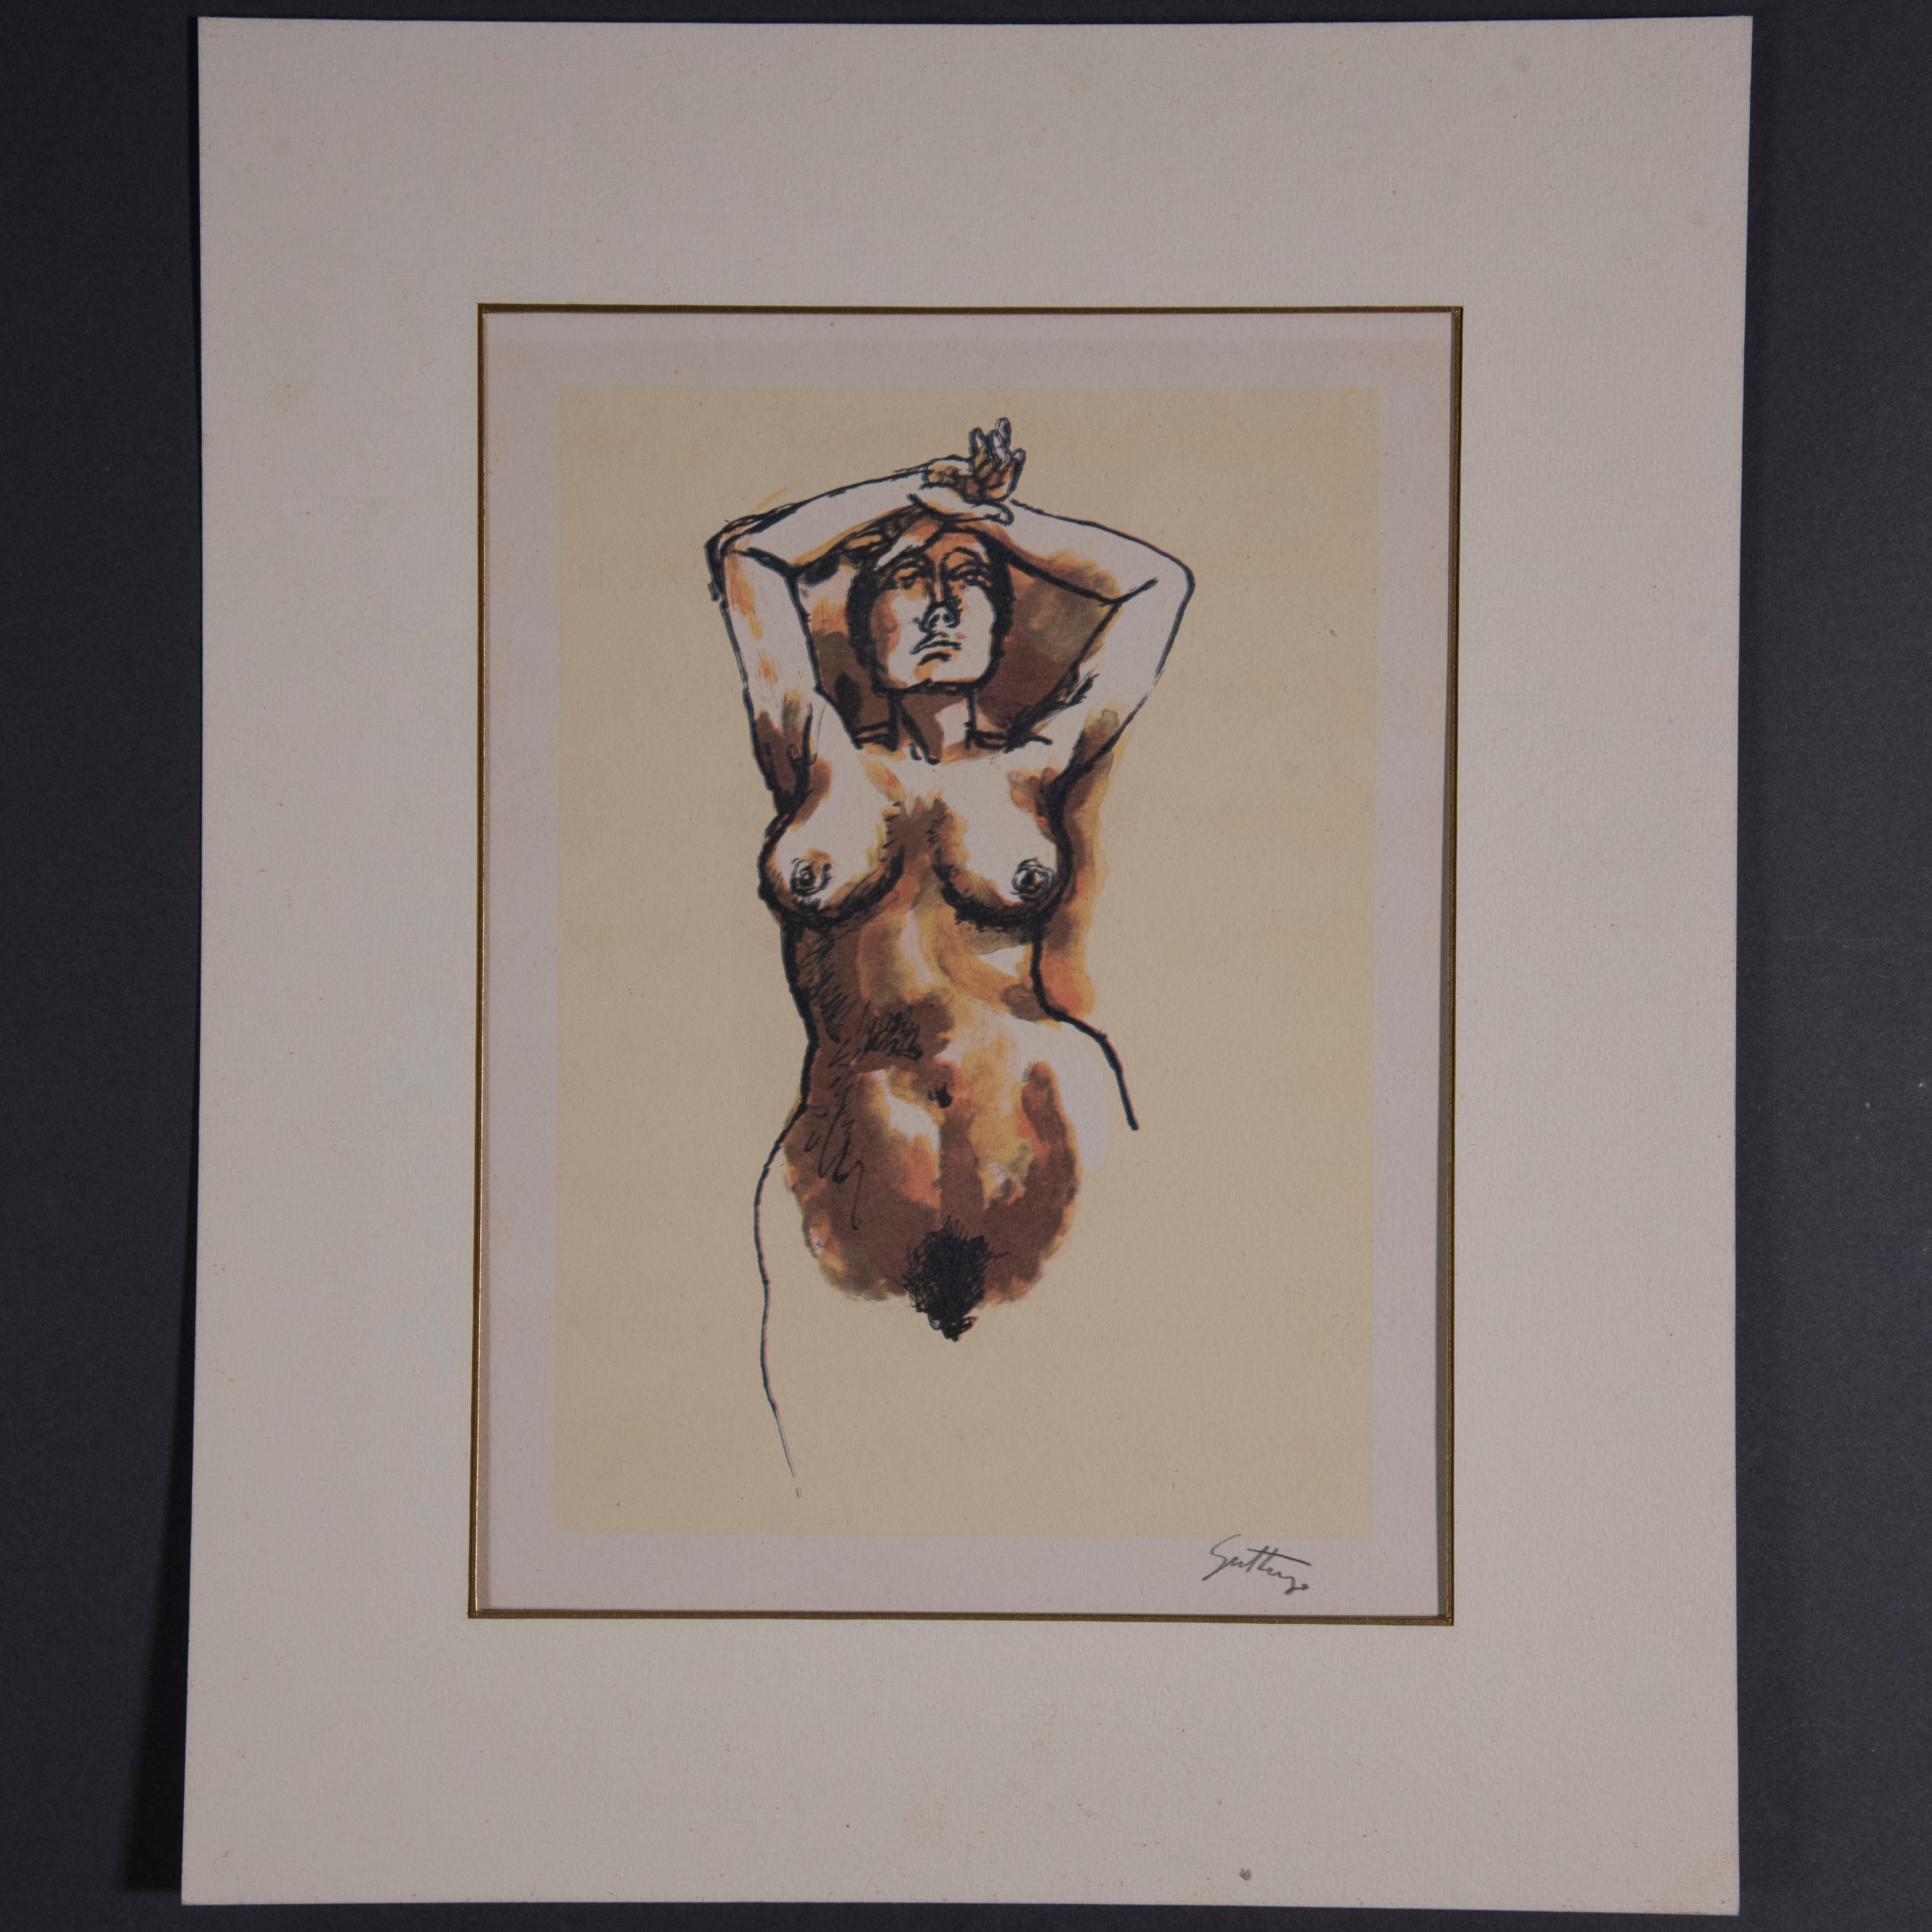 Paper Renato Guttuso Signed and Colored Nude Etching